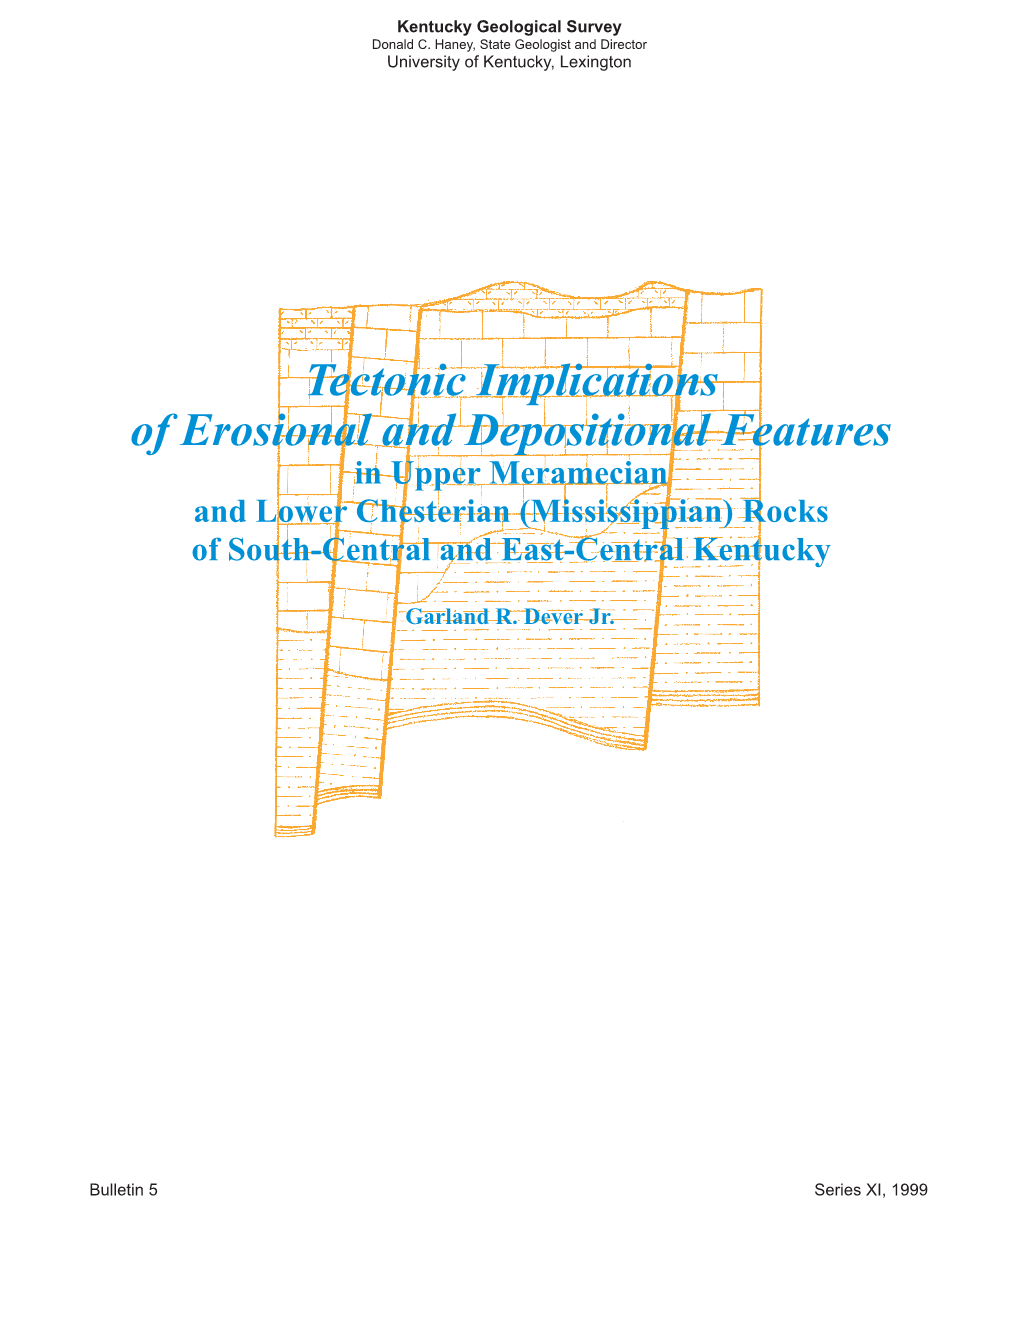 Tectonic Implications of Erosional and Depositional Features in Upper Meramecian and Lower Chesterian (Mississippian) Rocks of South-Central and East-Central Kentucky